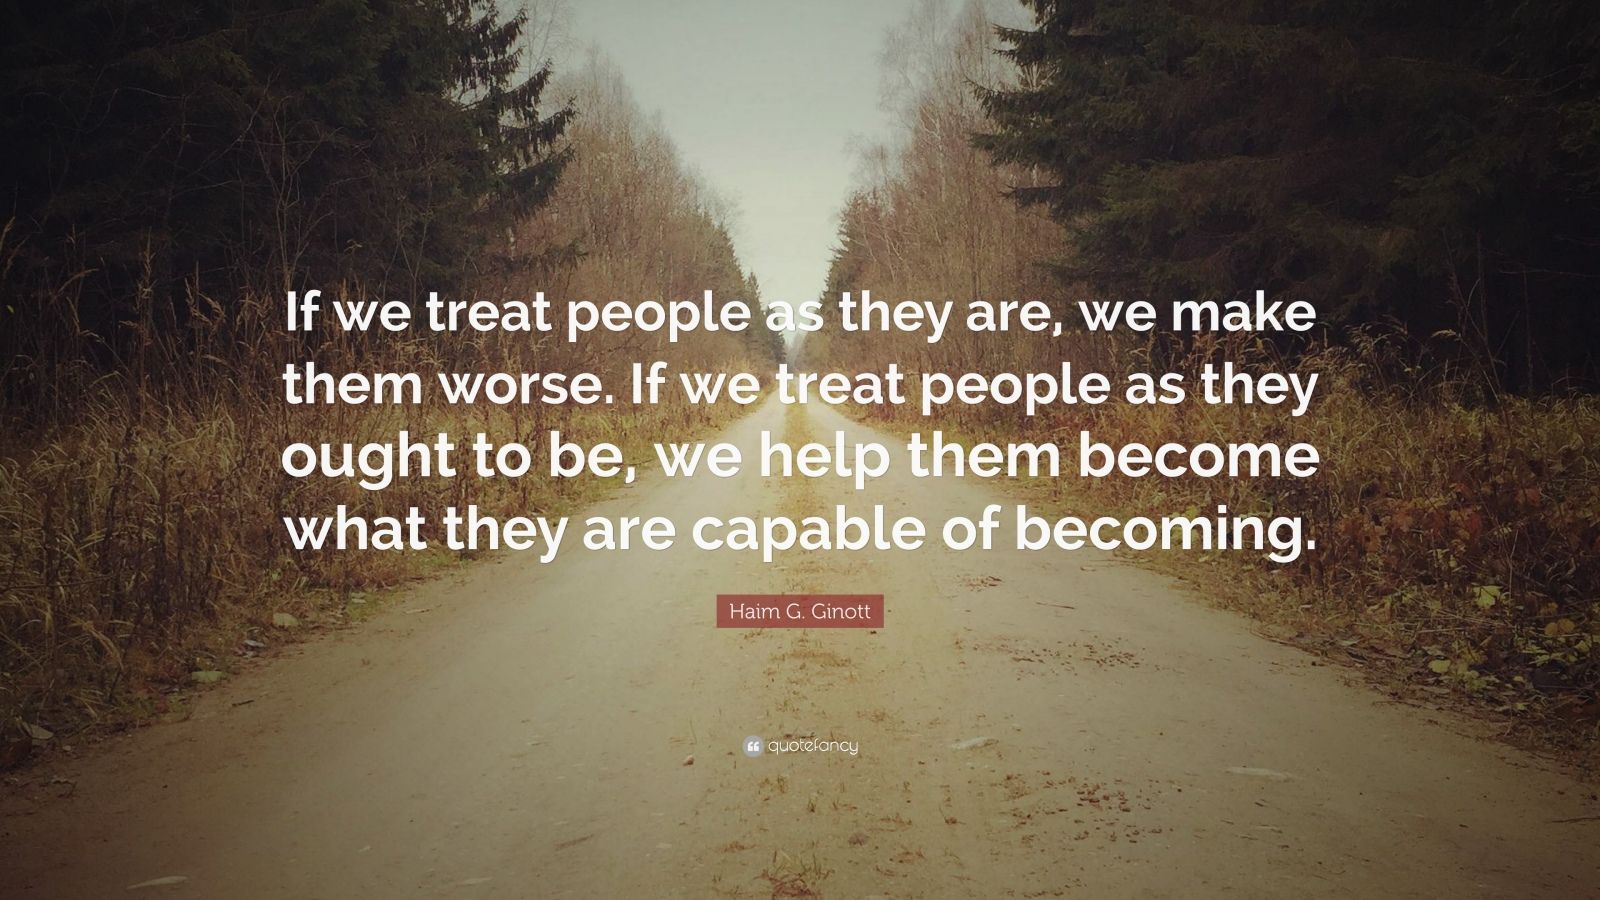 Haim G. Ginott Quote: “If we treat people as they are, we make them ...